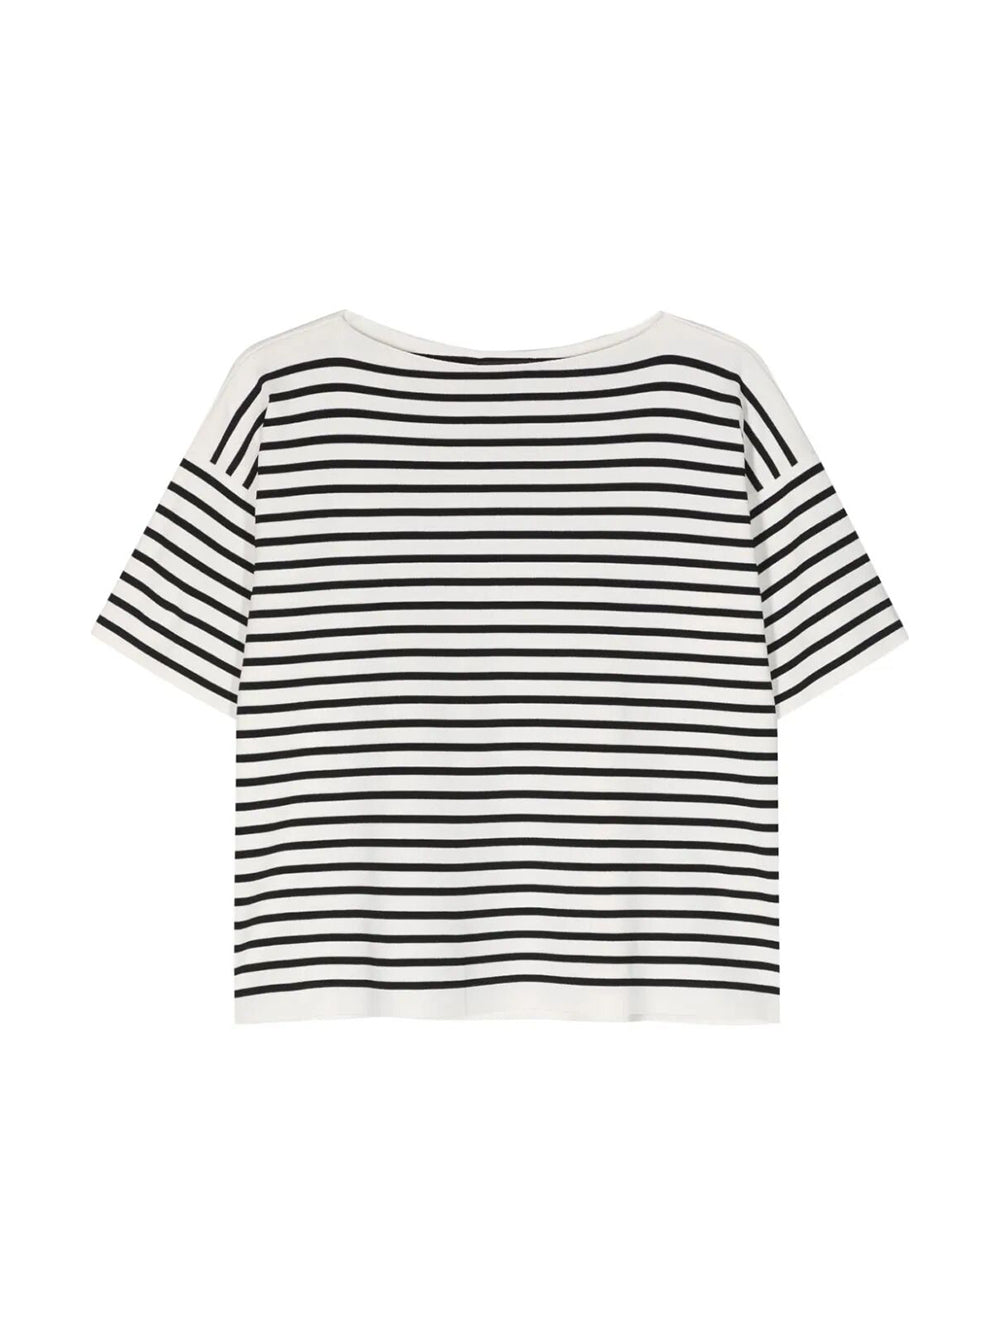 Striped top with boat neckline